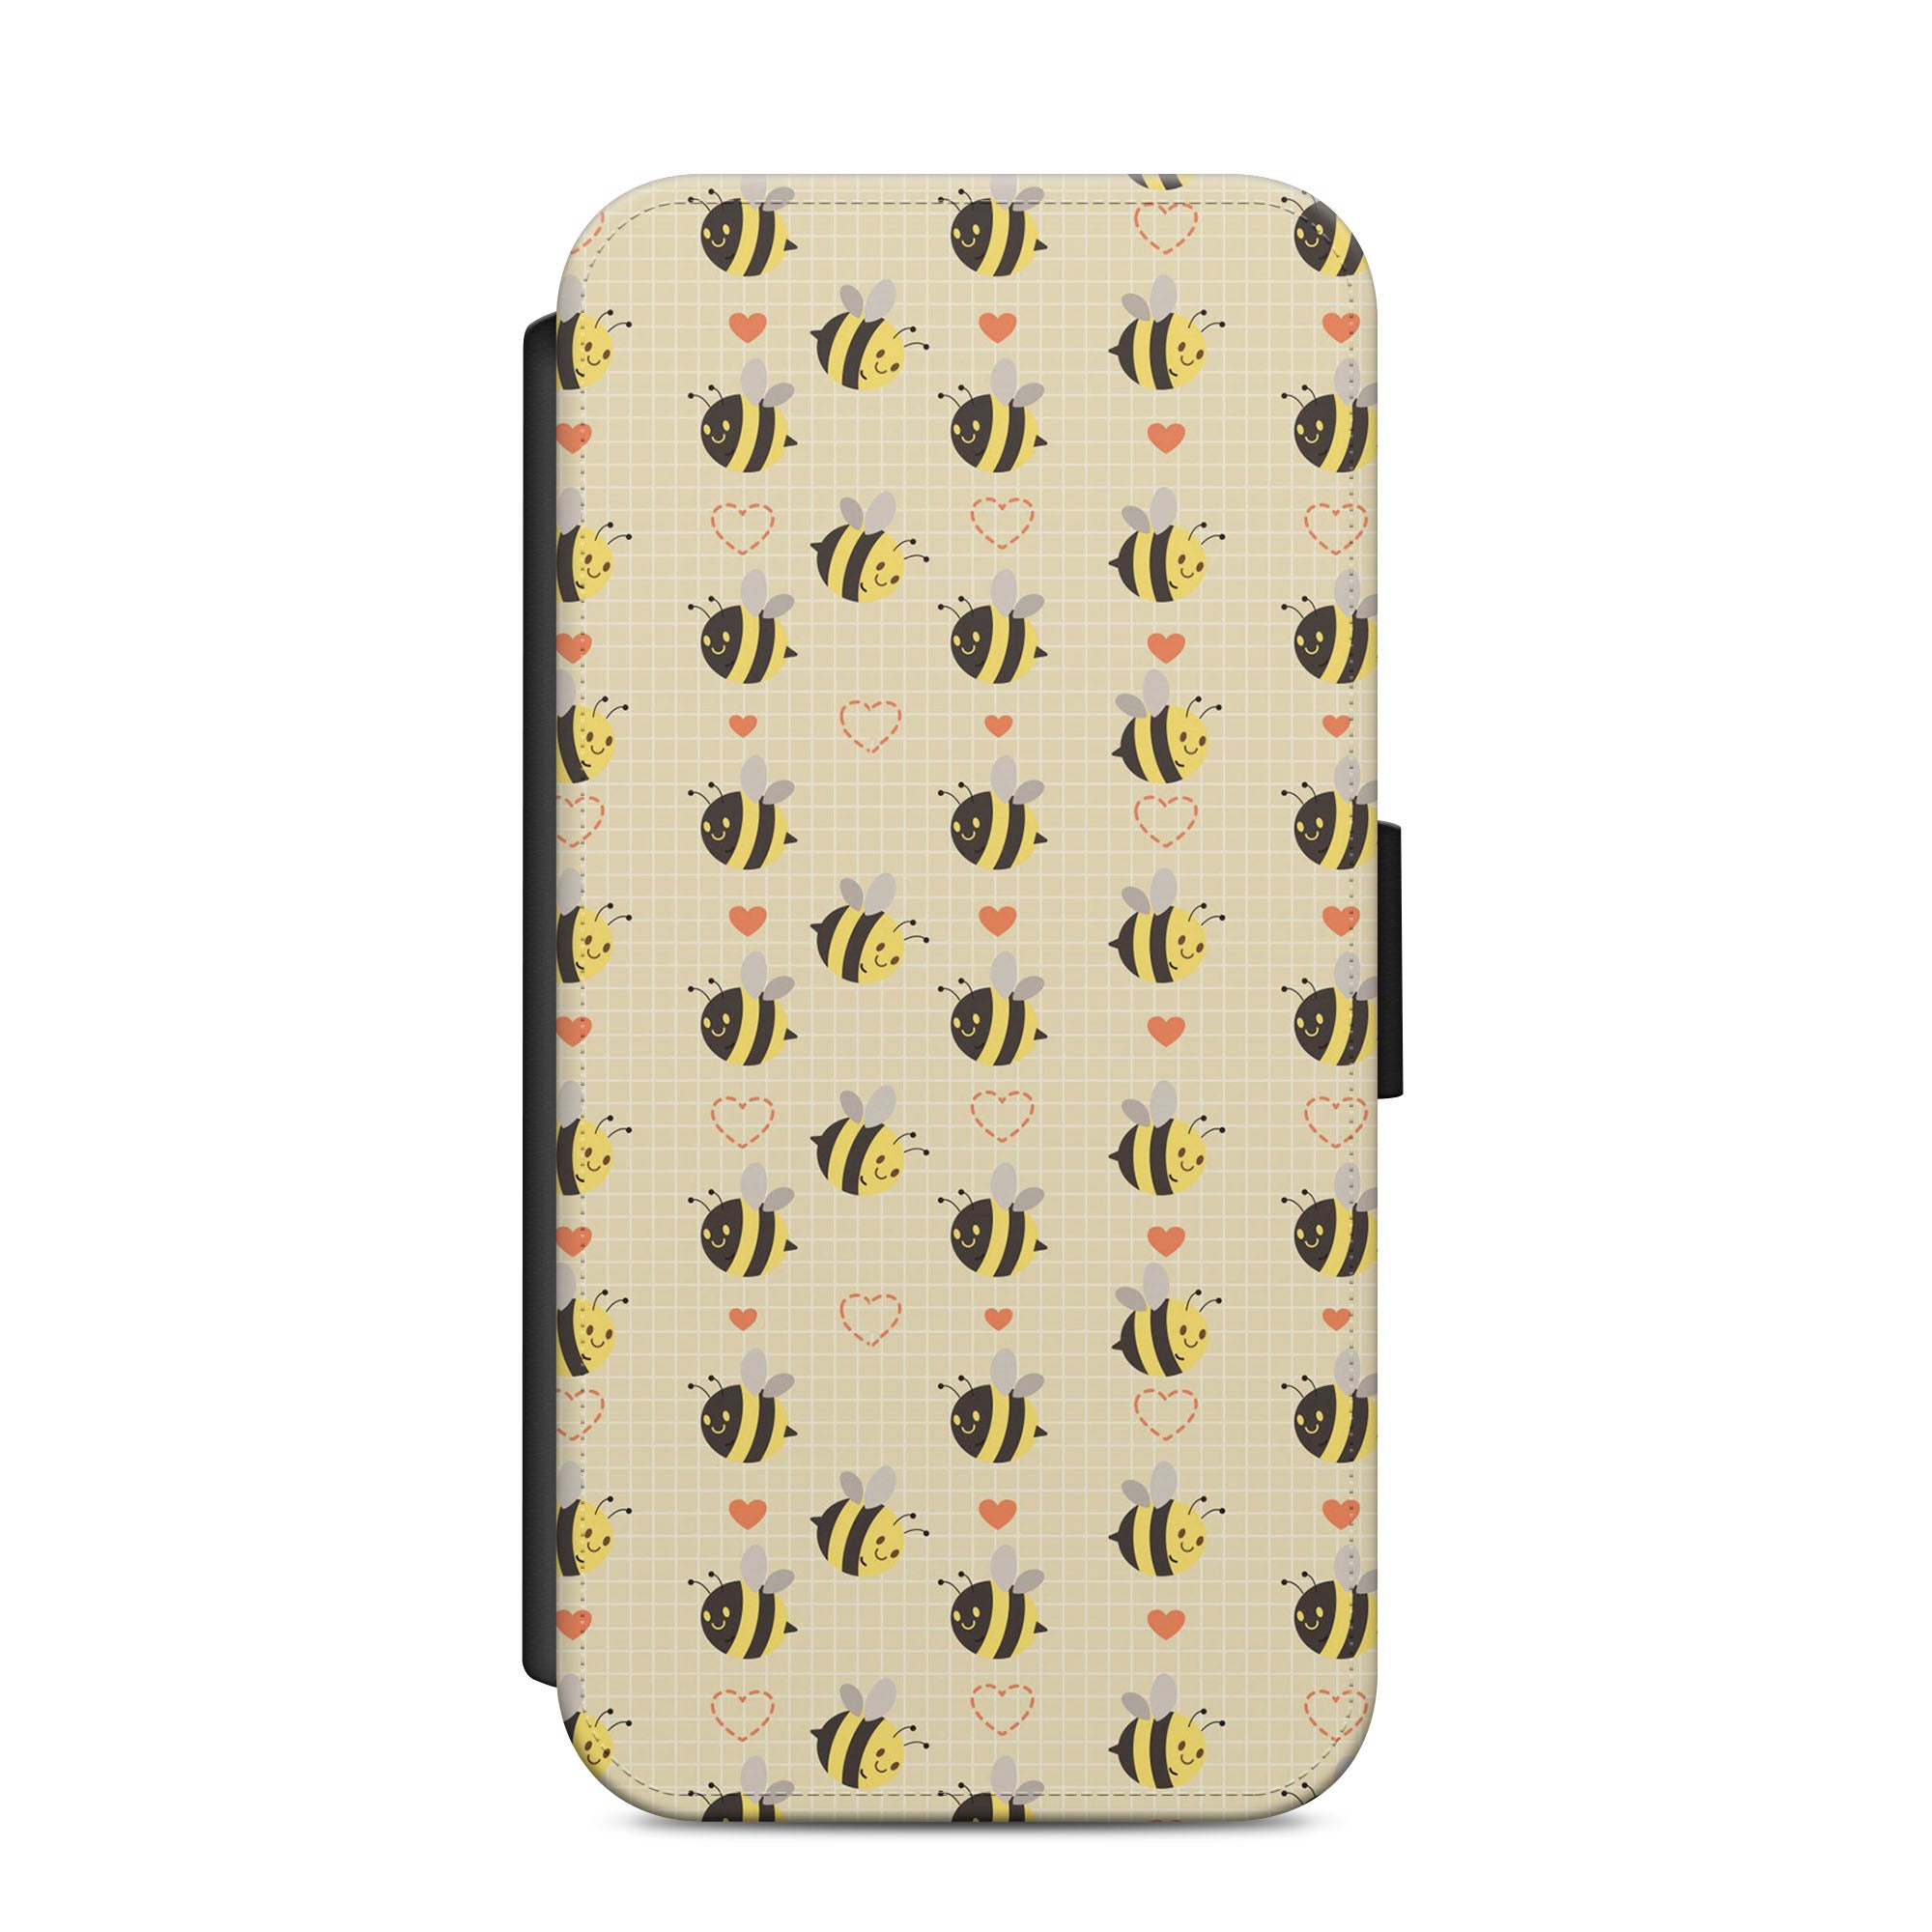 Bumble Bees & Hearts Faux Leather Flip Case Wallet for iPhone / Samsung